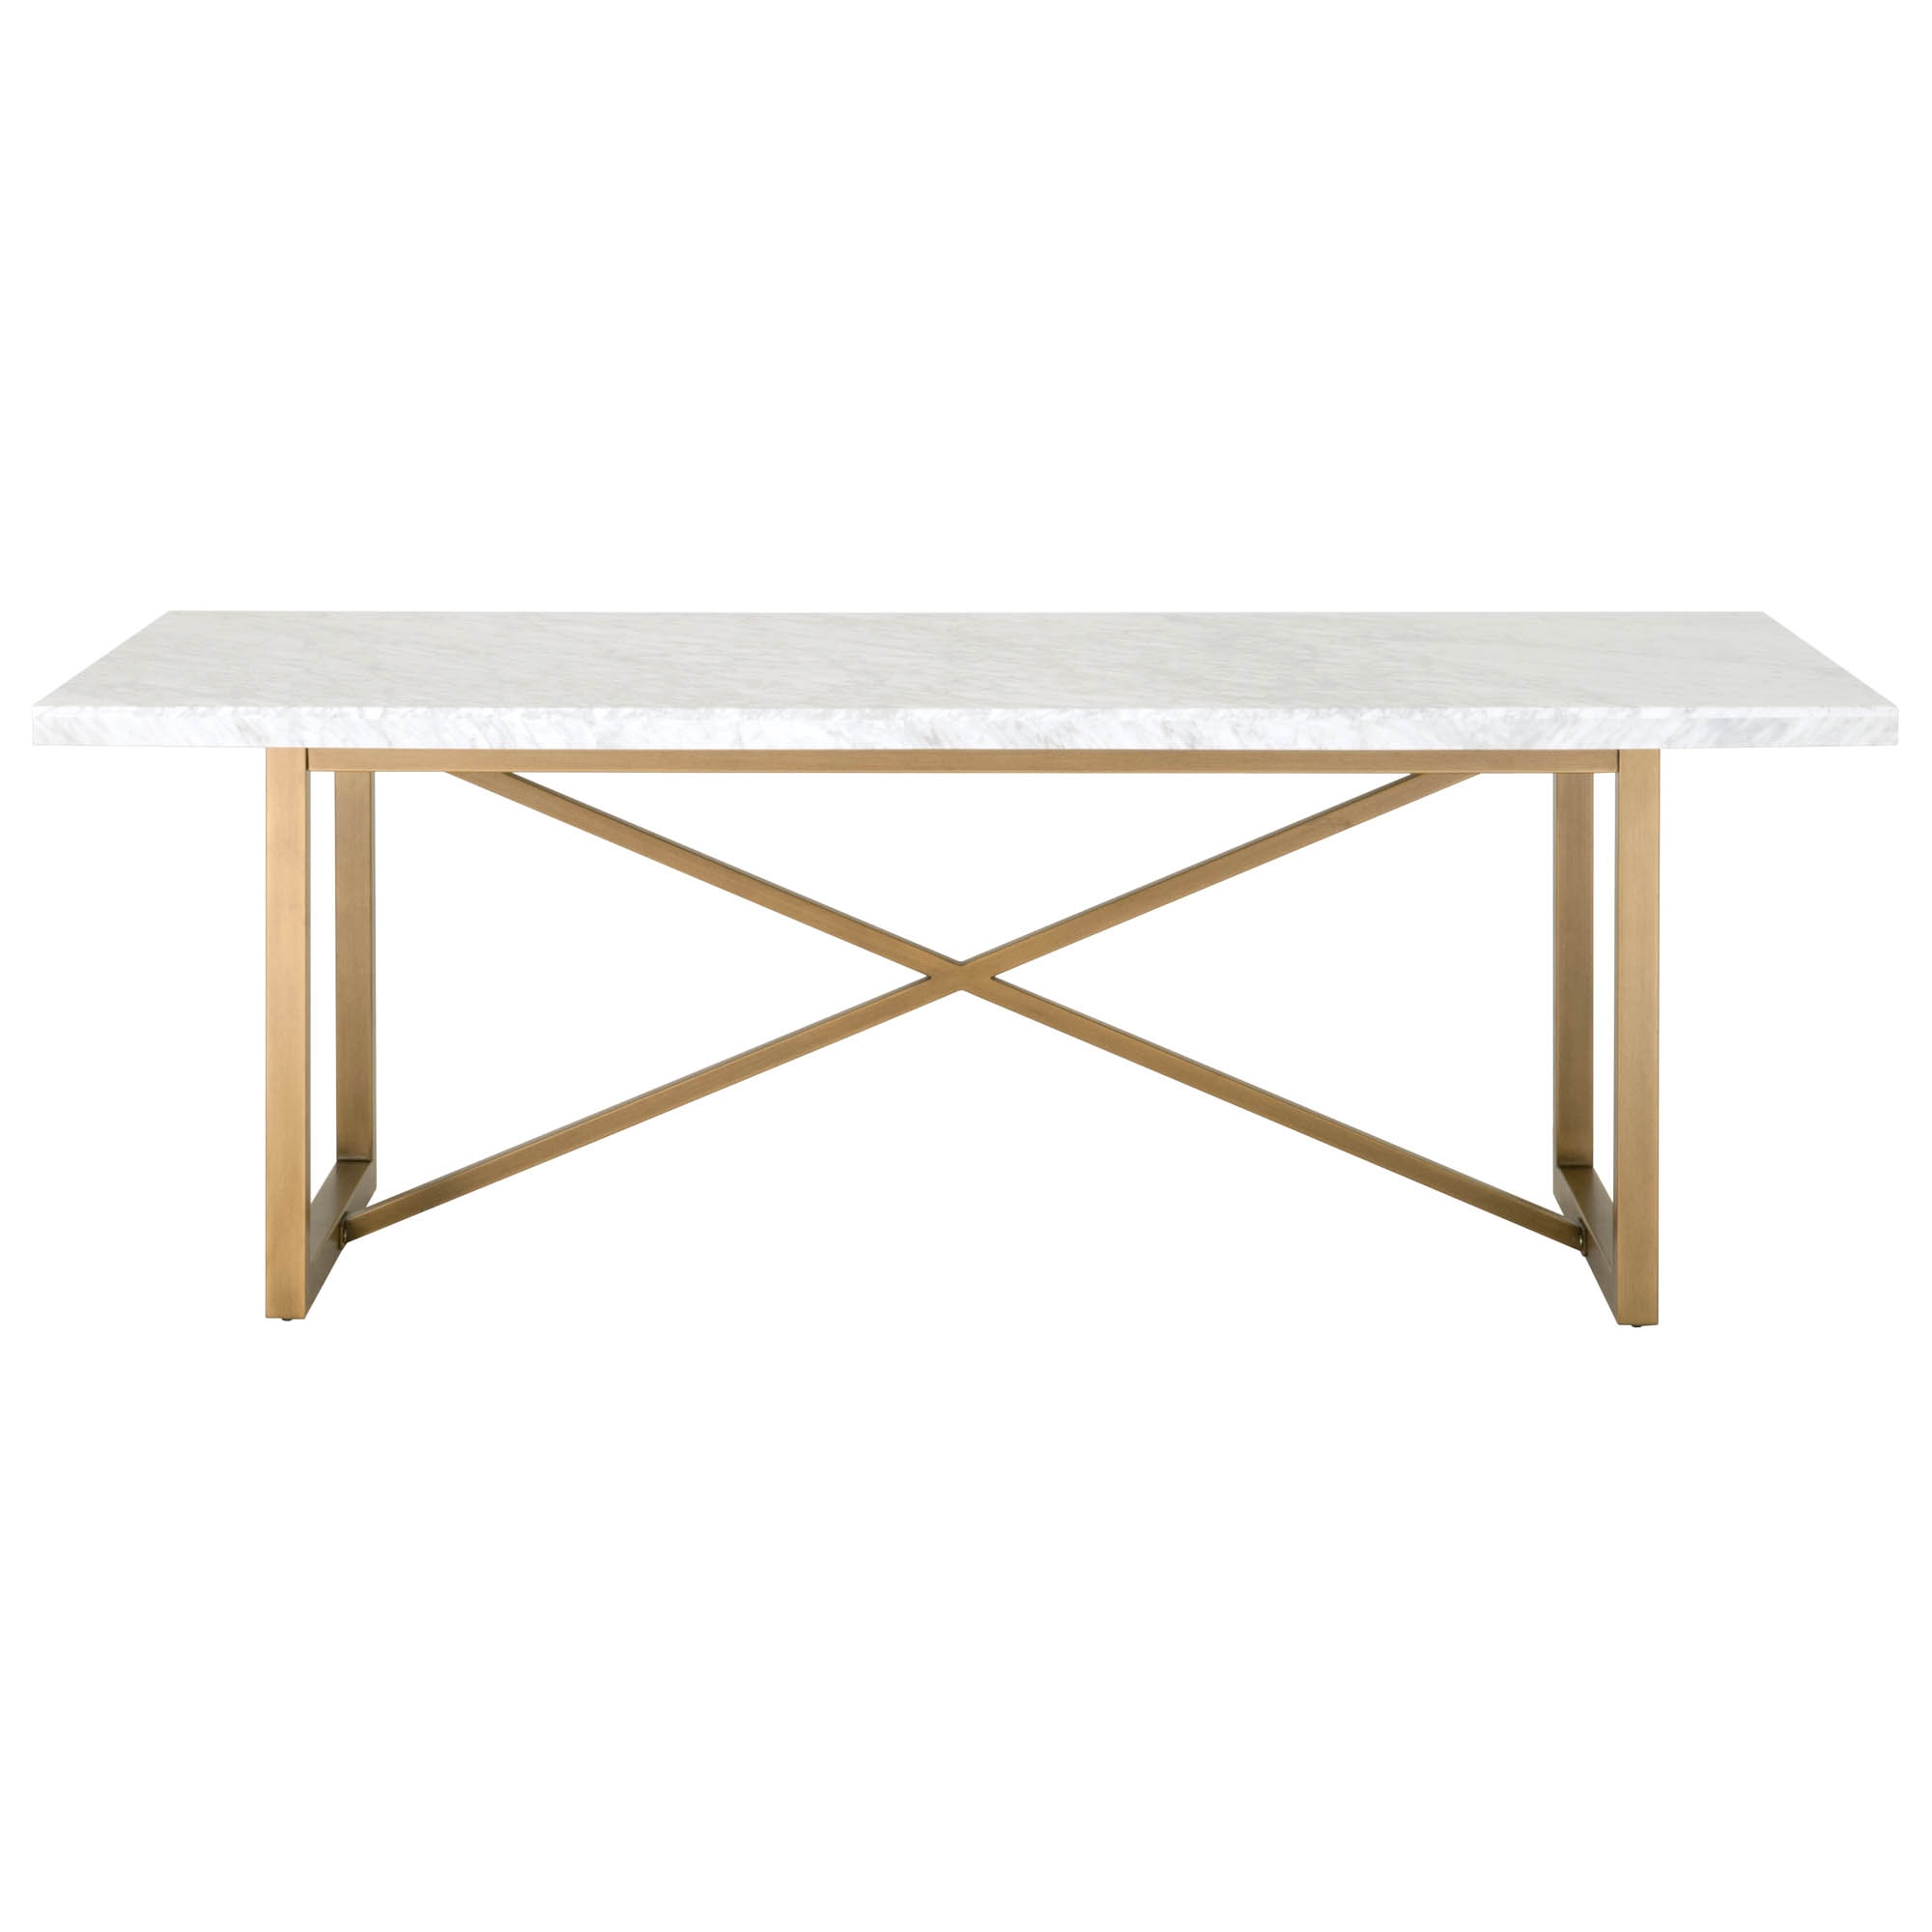 Carrera Dining Table, White & Gold - Image 0